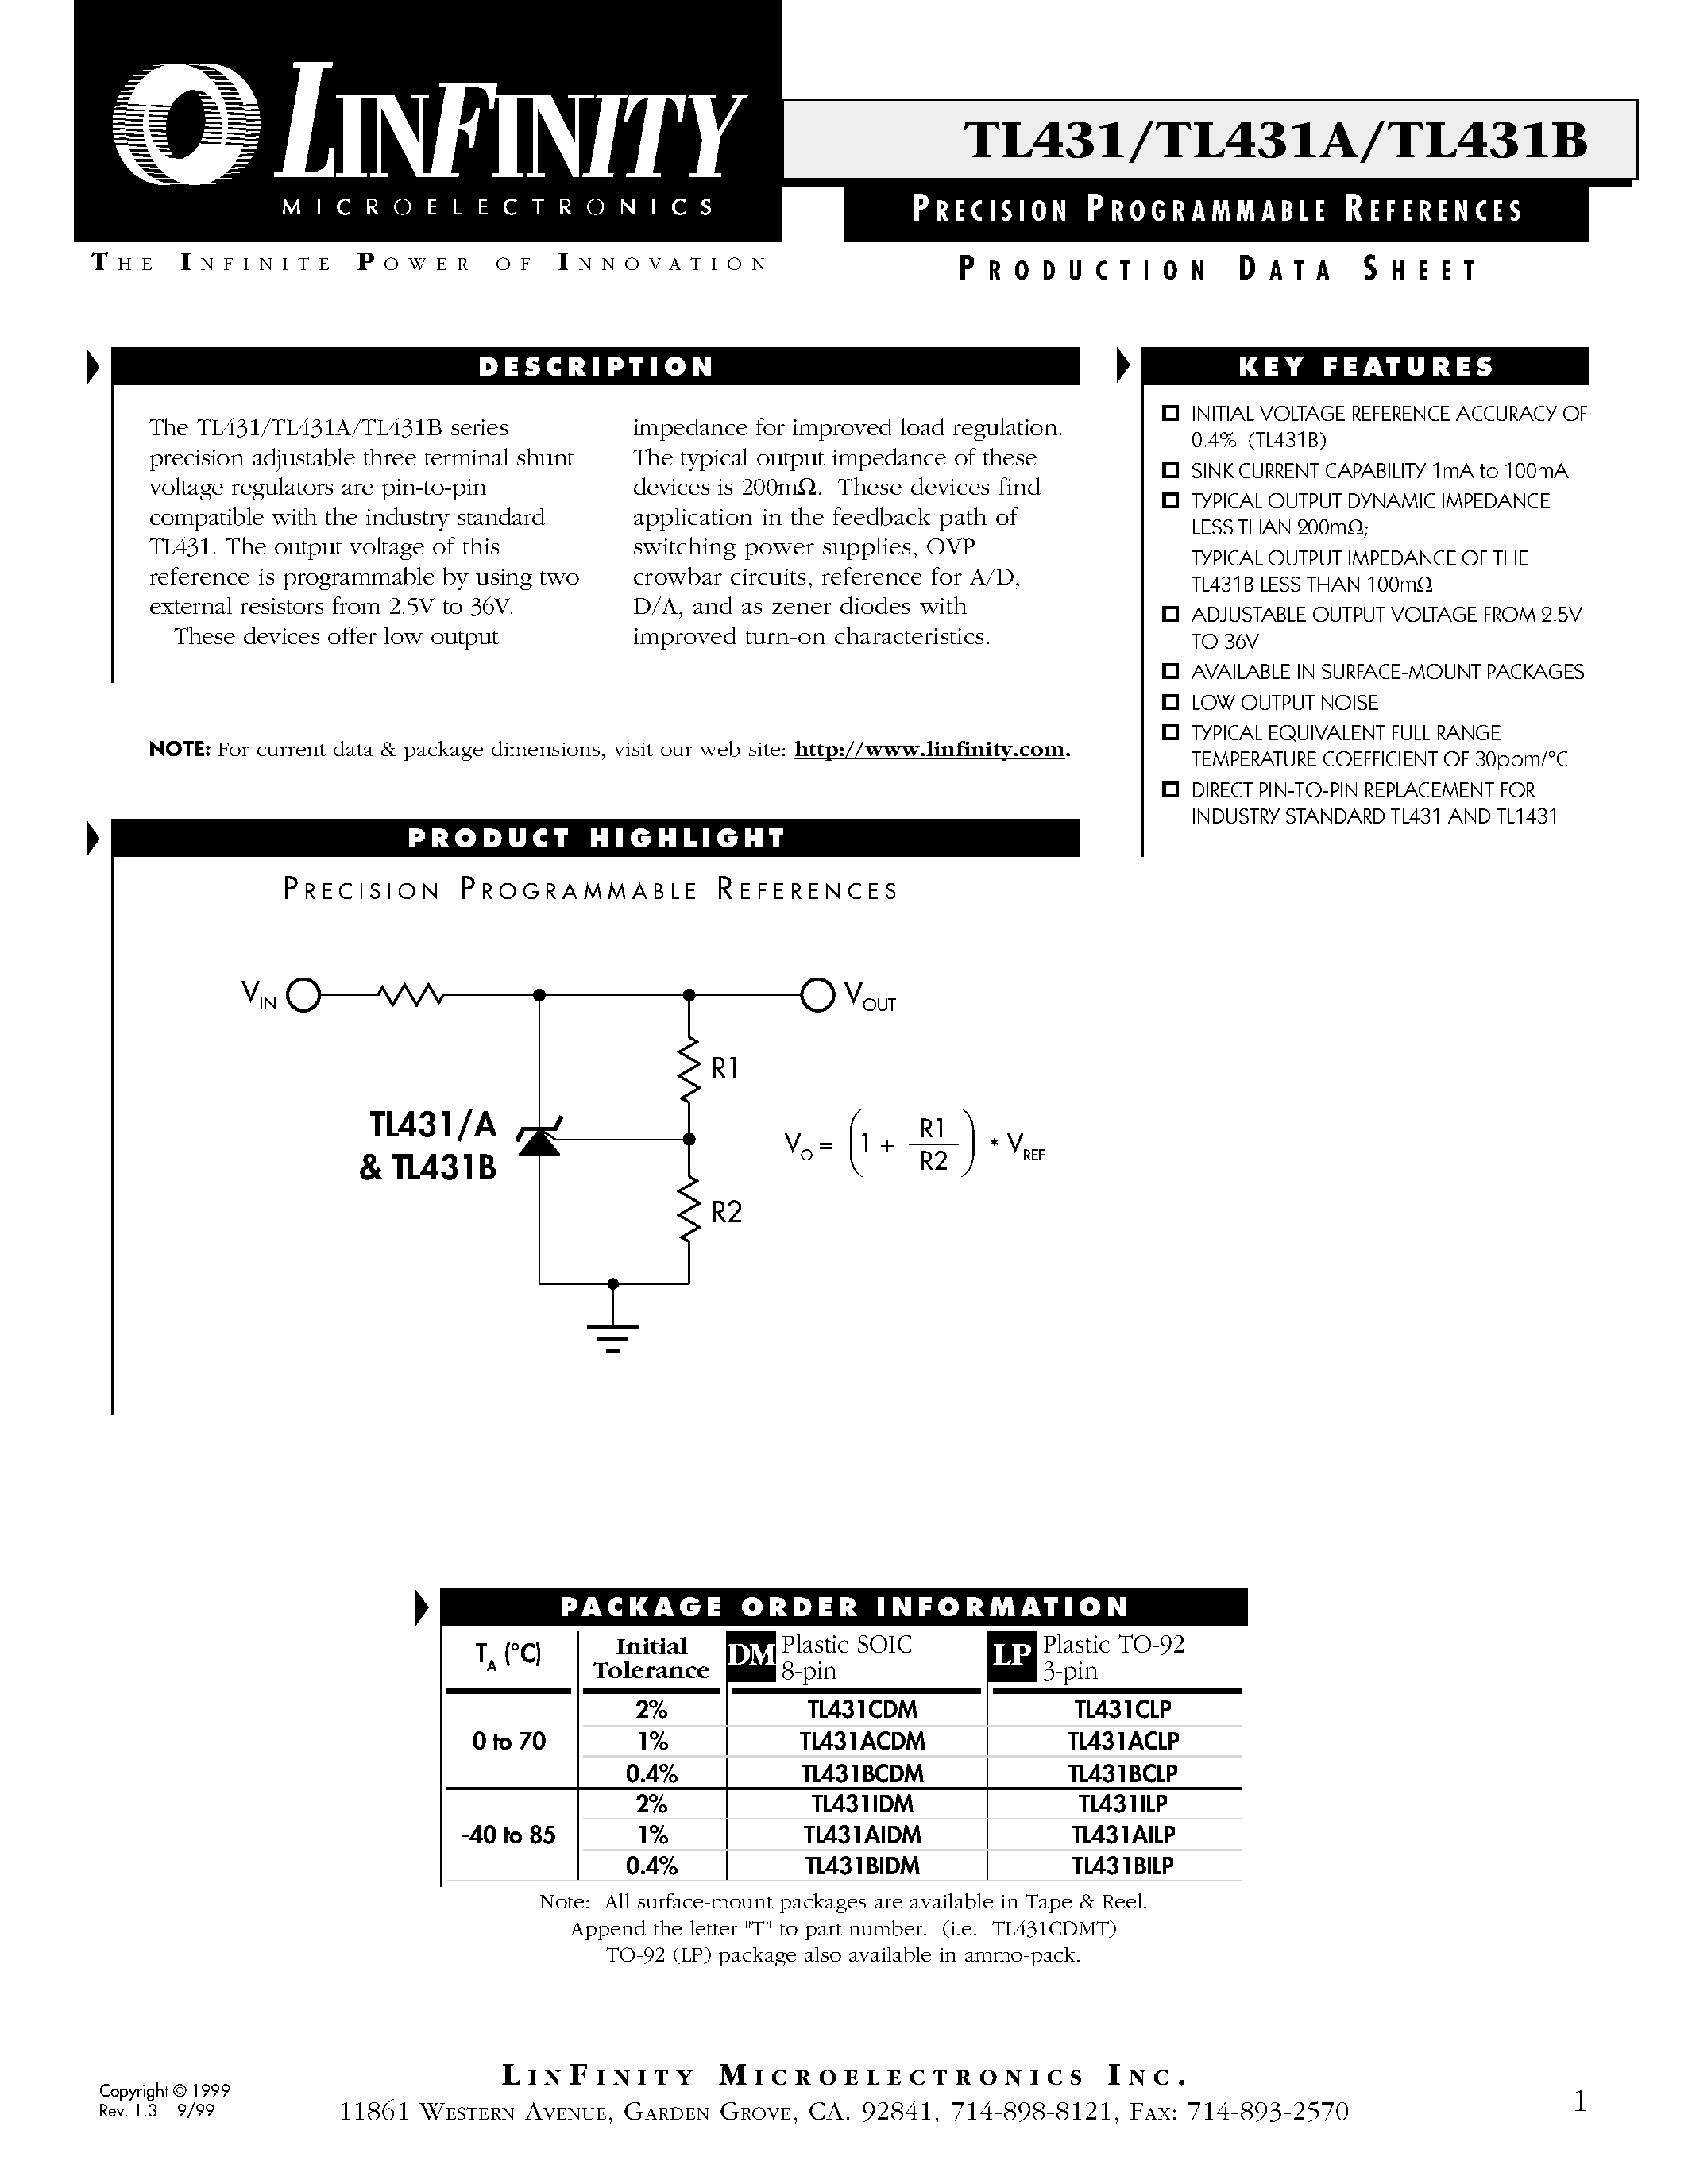 Datasheet TL431 - PRECISION PROGRAMMABLE REFERENCES page 1